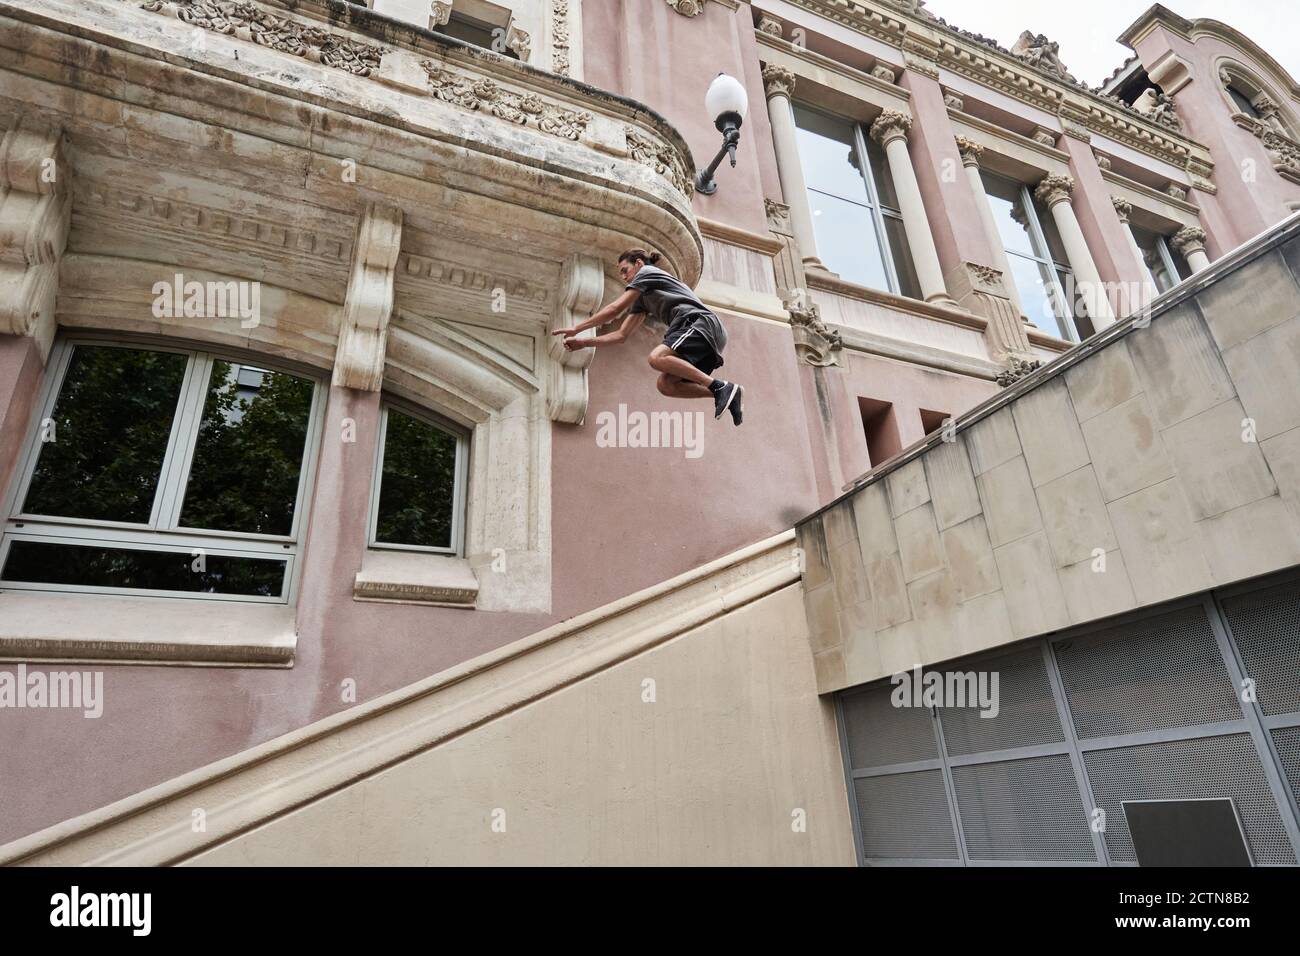 Focused young male jumping over stone steps in city while doing parkour and showing trick Stock Photo